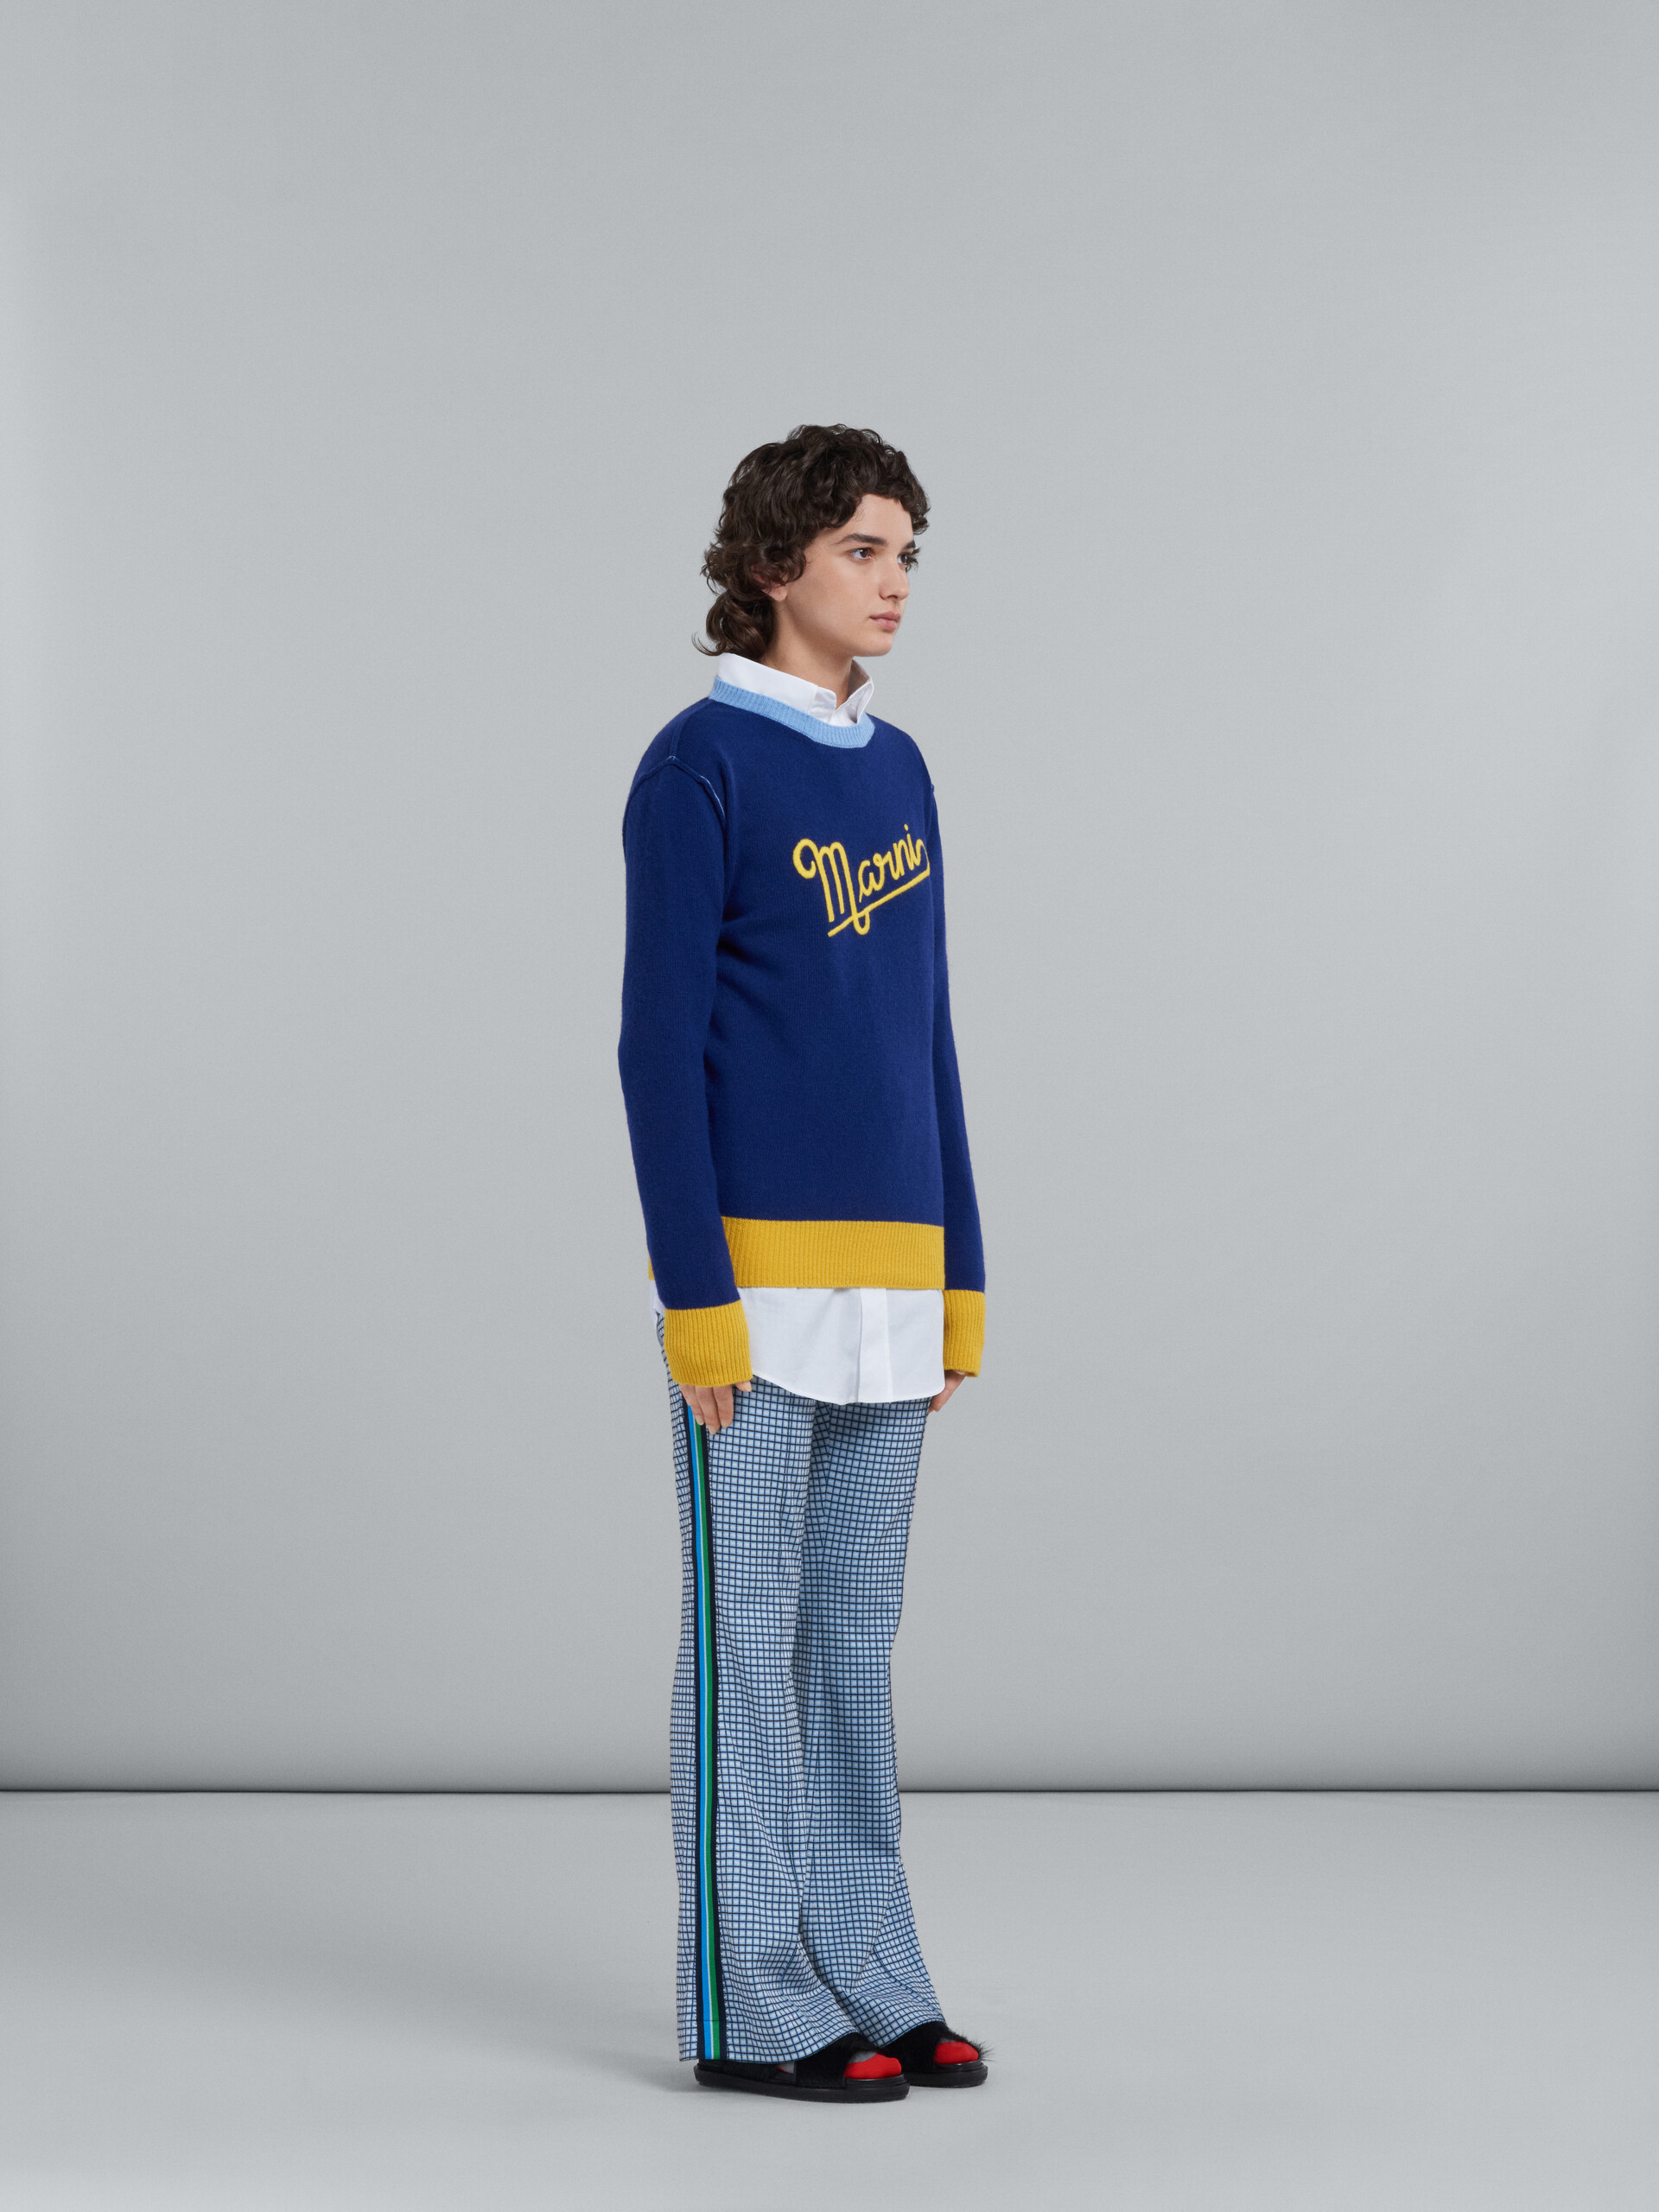 Blue wool sweater with logo - Pullovers - Image 5